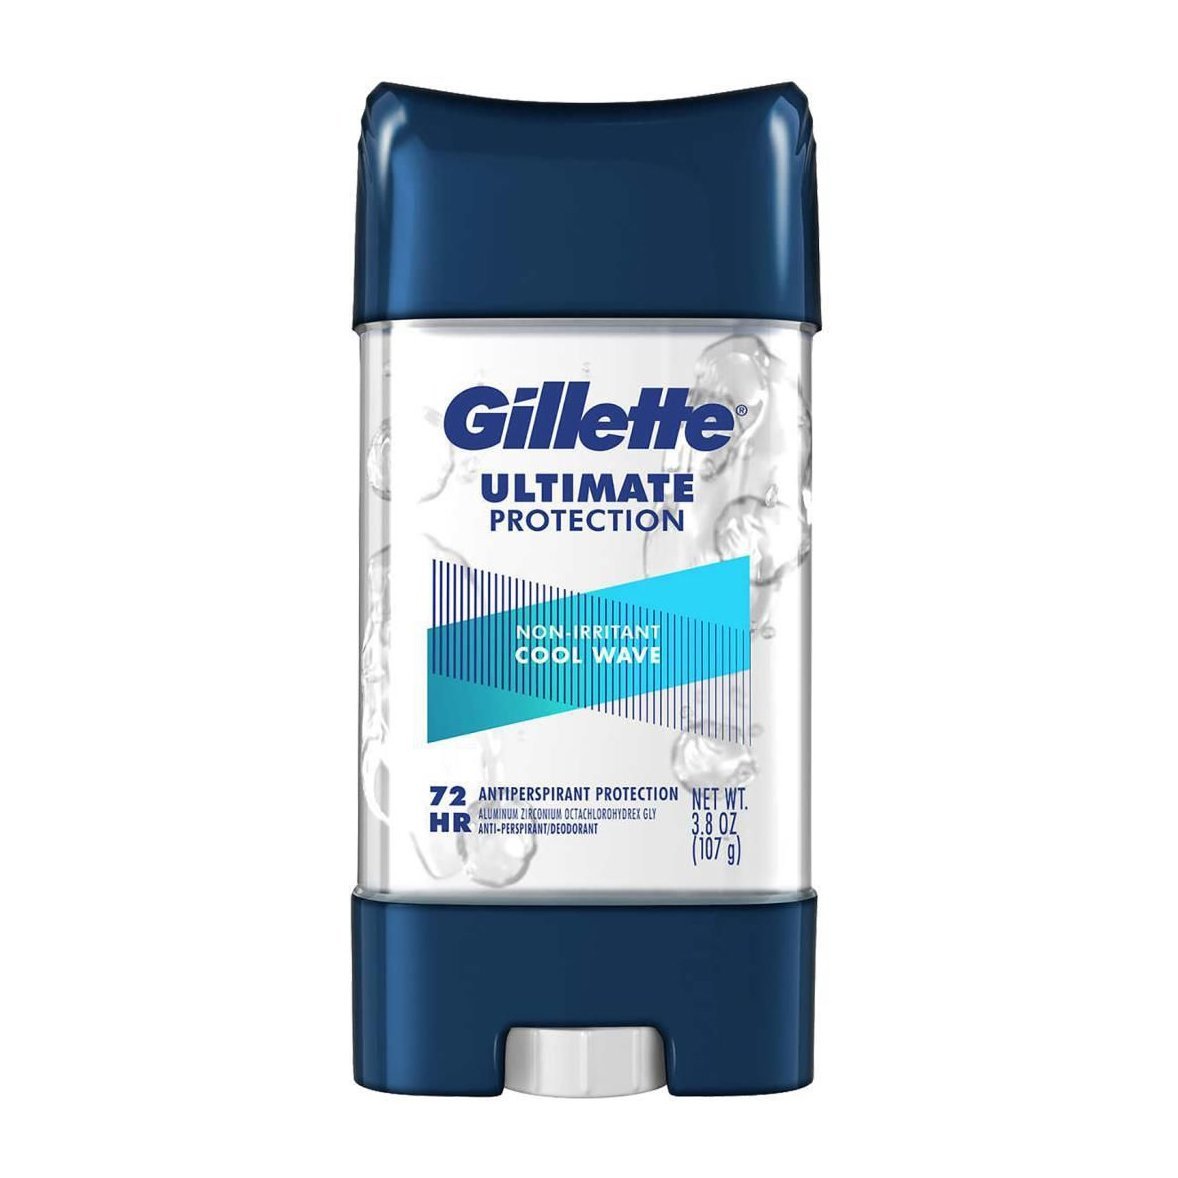 Gillette Ultimate Protection Non-Irritant Cool Wave Deodorant Gel – 107gm - Bloom Pharmacy